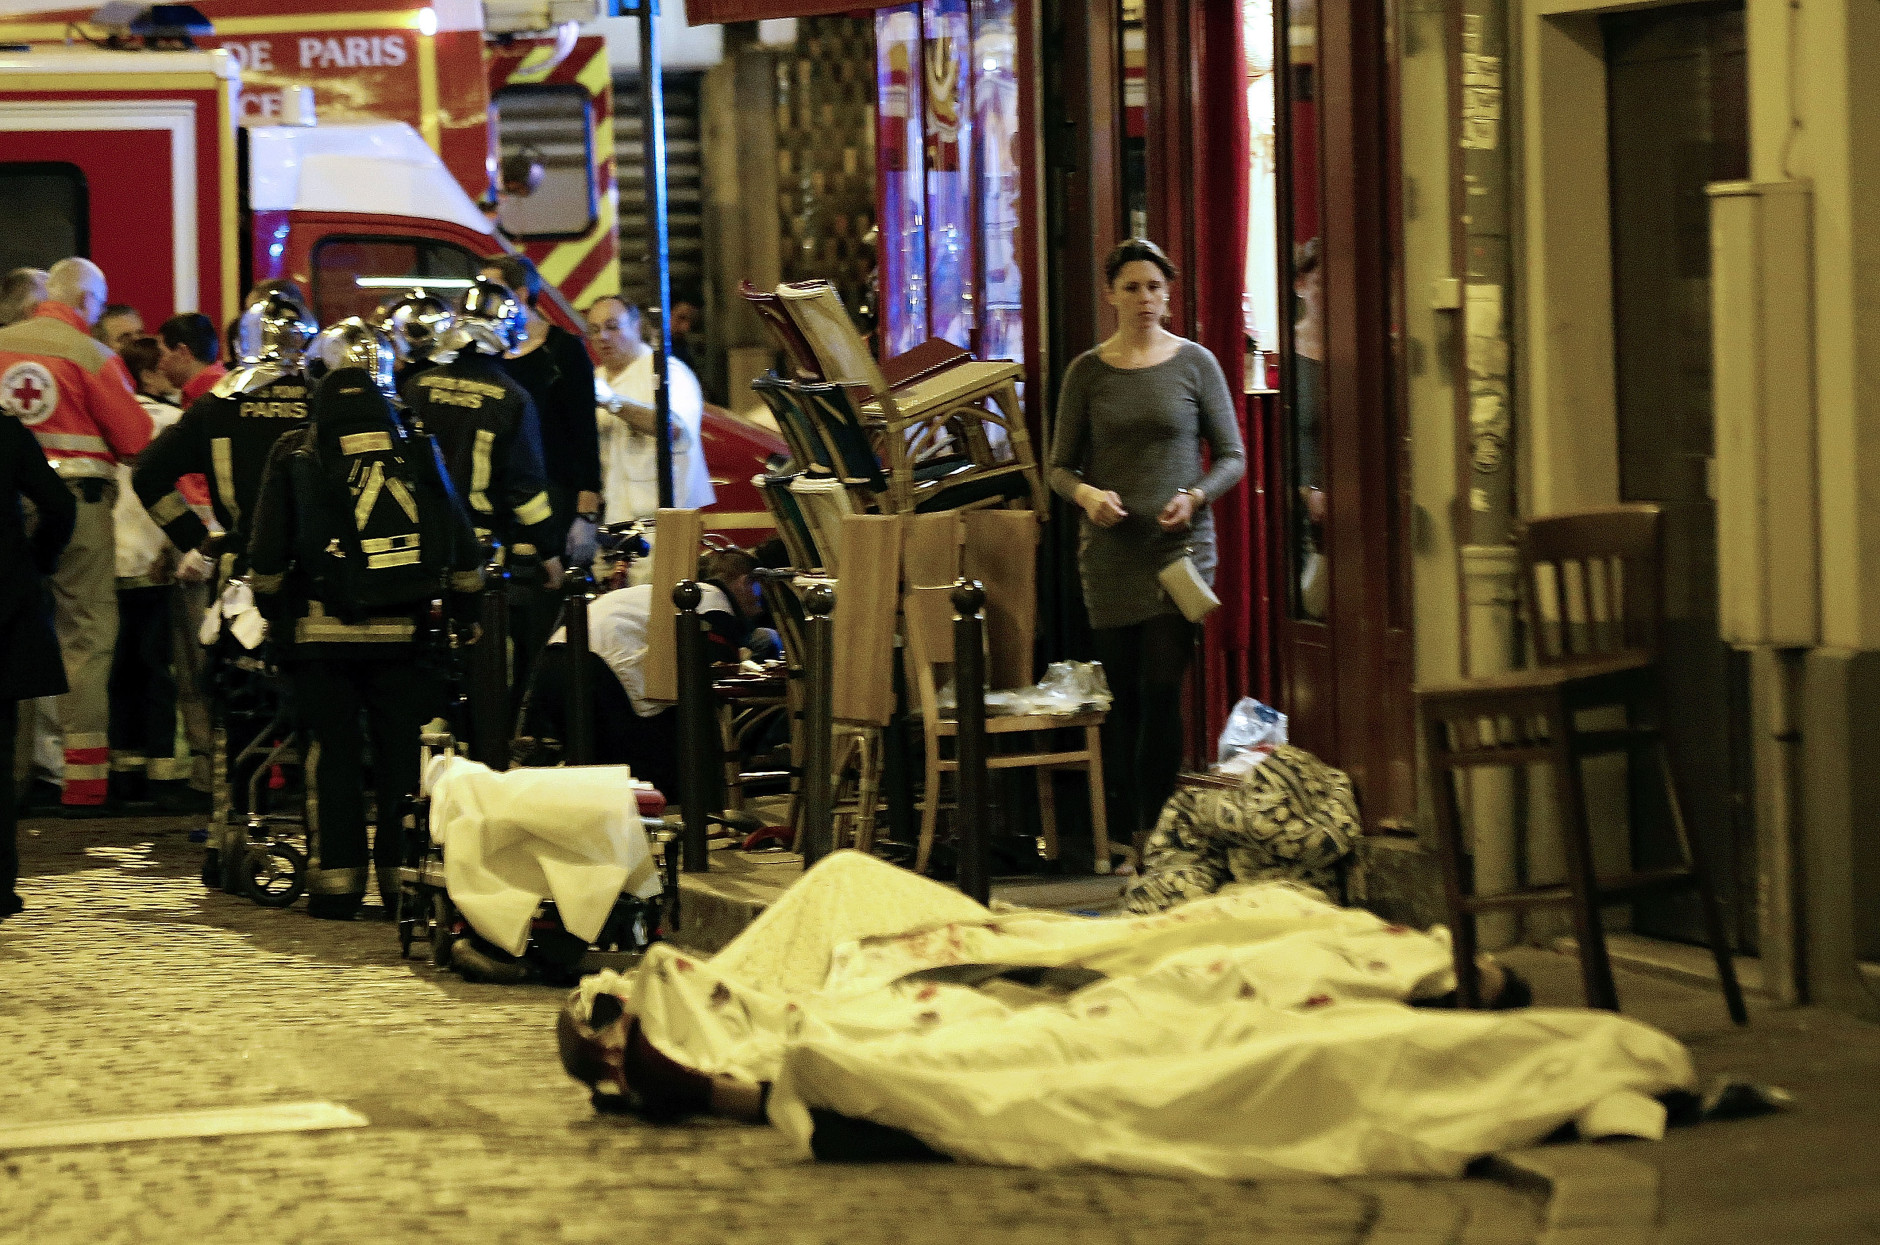 A woman watches victims in the 10th district of Paris, Friday, Nov. 13, 2015.  At least 35 people were killed Friday in shootings and explosions around Paris, many of them in a popular concert hall where patrons were taken hostage, police and medical officials said. (AP Photo/Jacques Brinon)